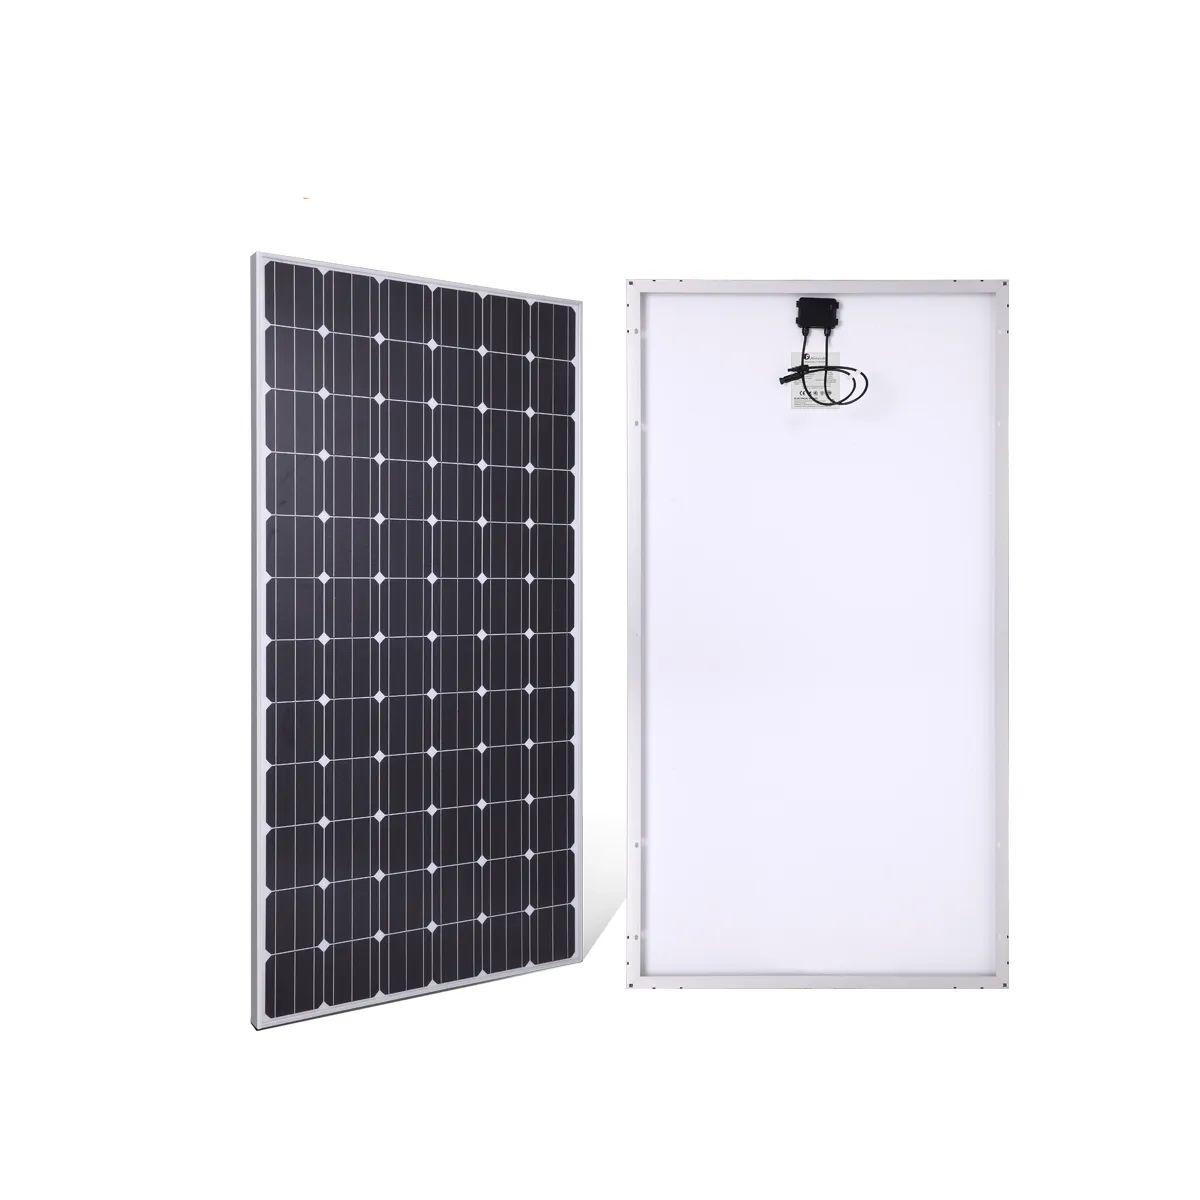 560 Watt Monocrystalline Solar Panel High Efficiency Module PV Power for Battery Charging Boat, Caravan, RV and Any Other Off Gr